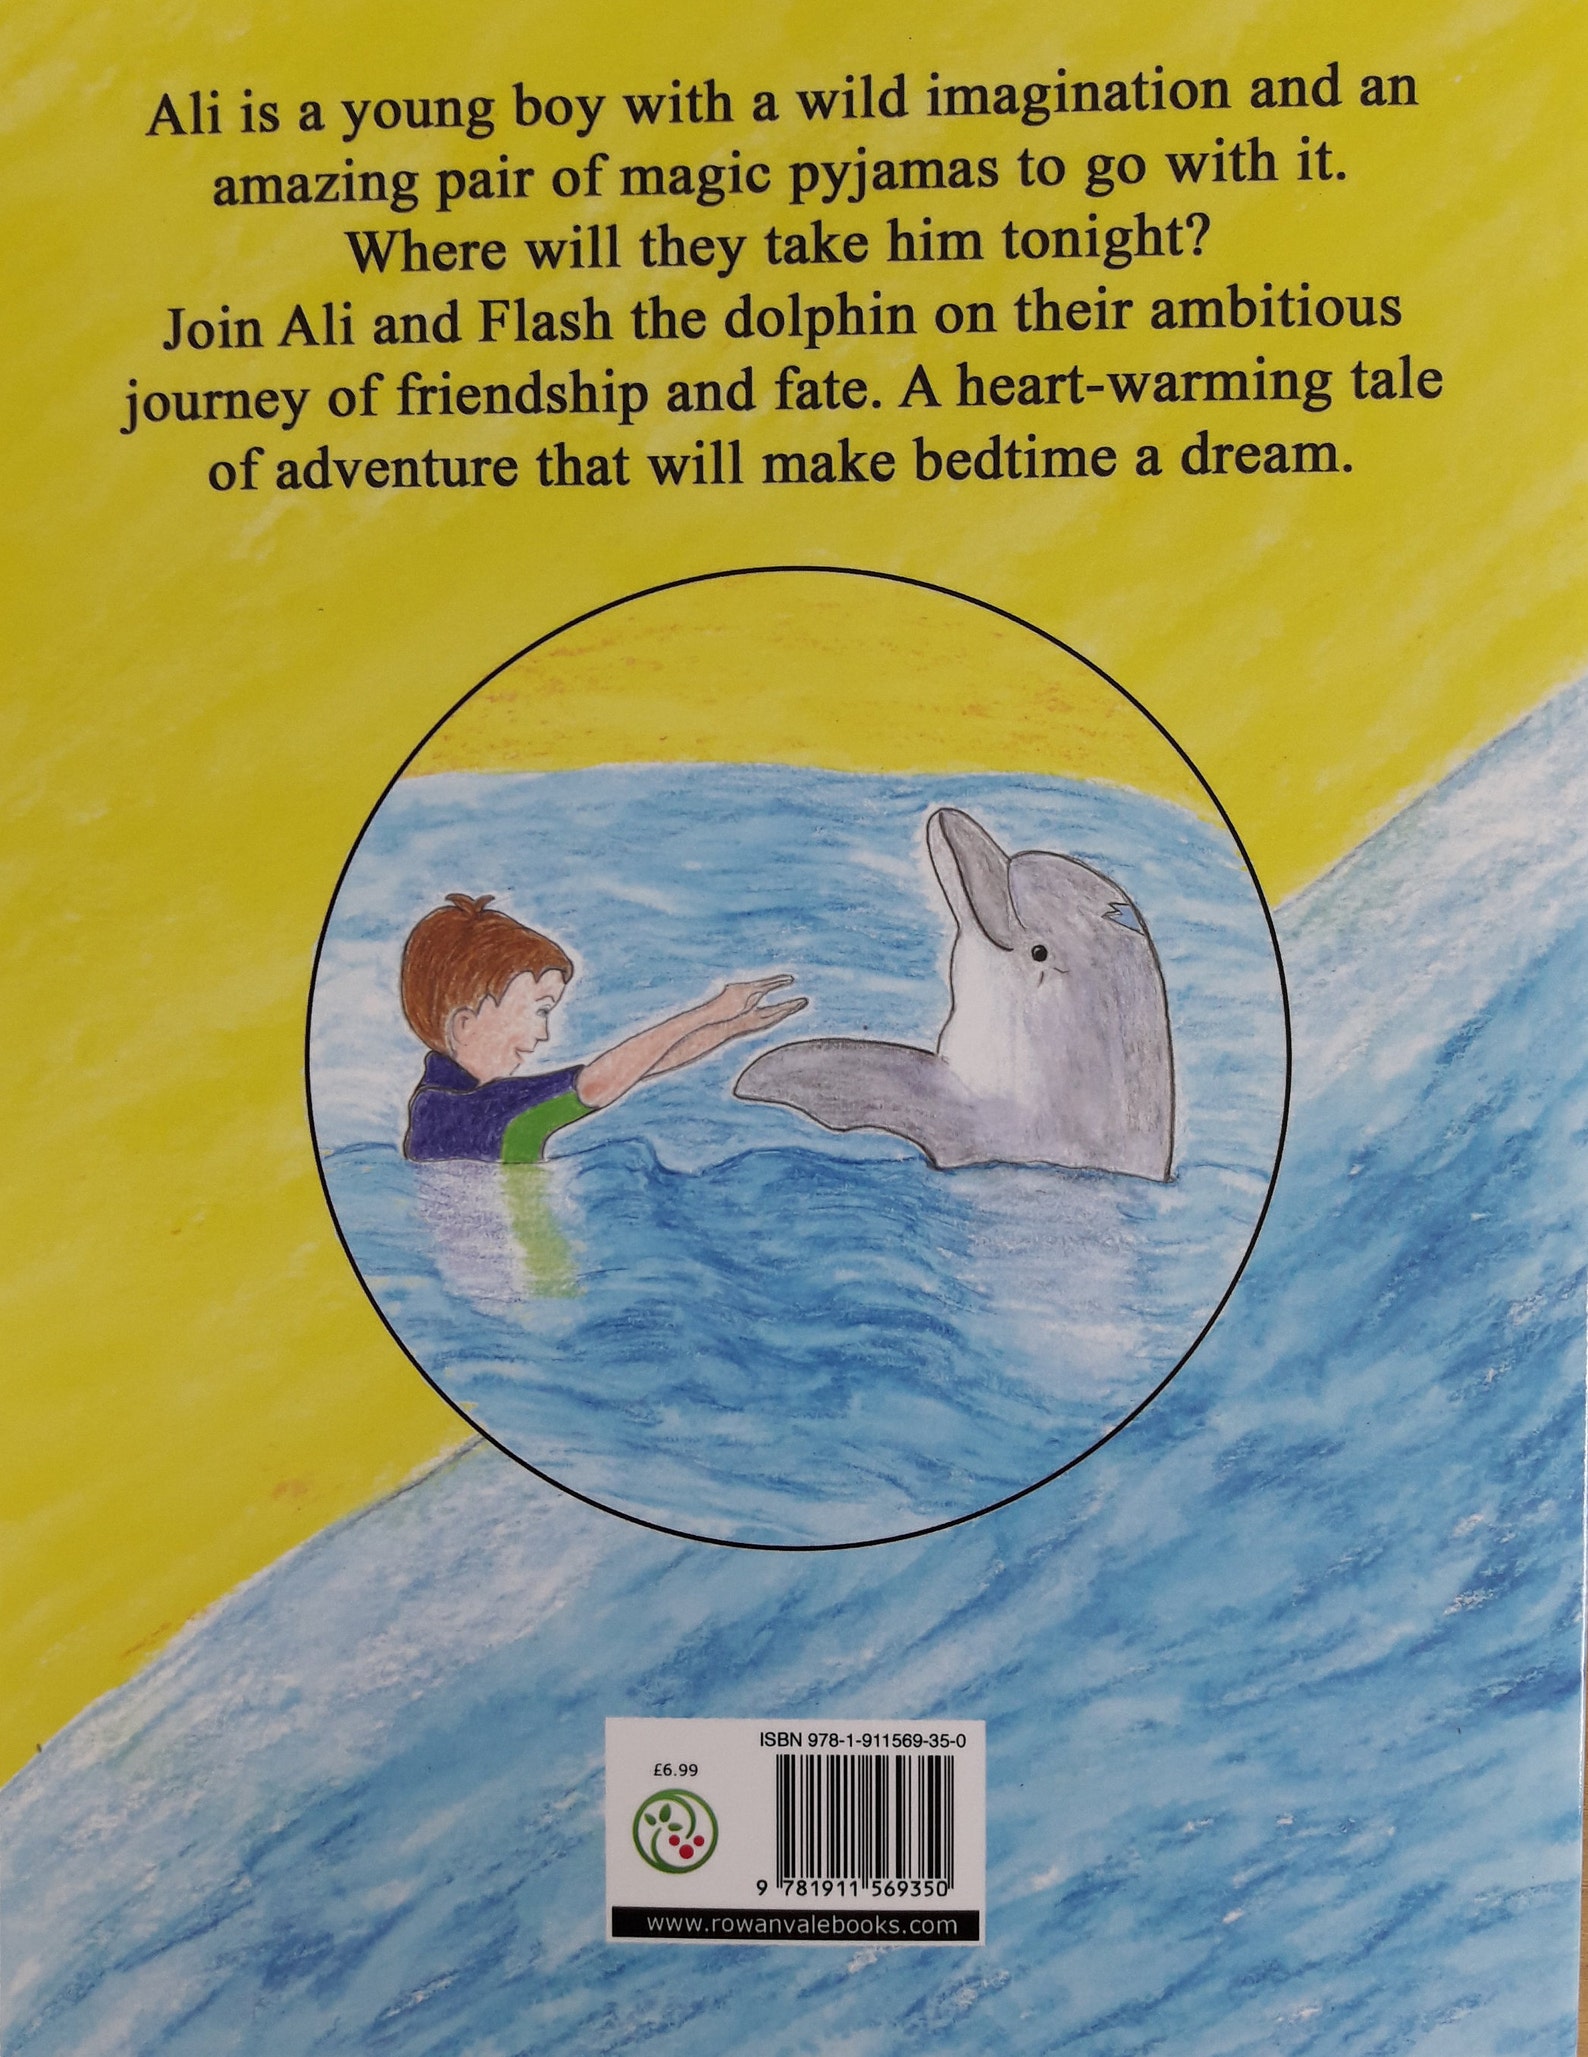 Swimming With Dolphins Children's Picture Book - Etsy